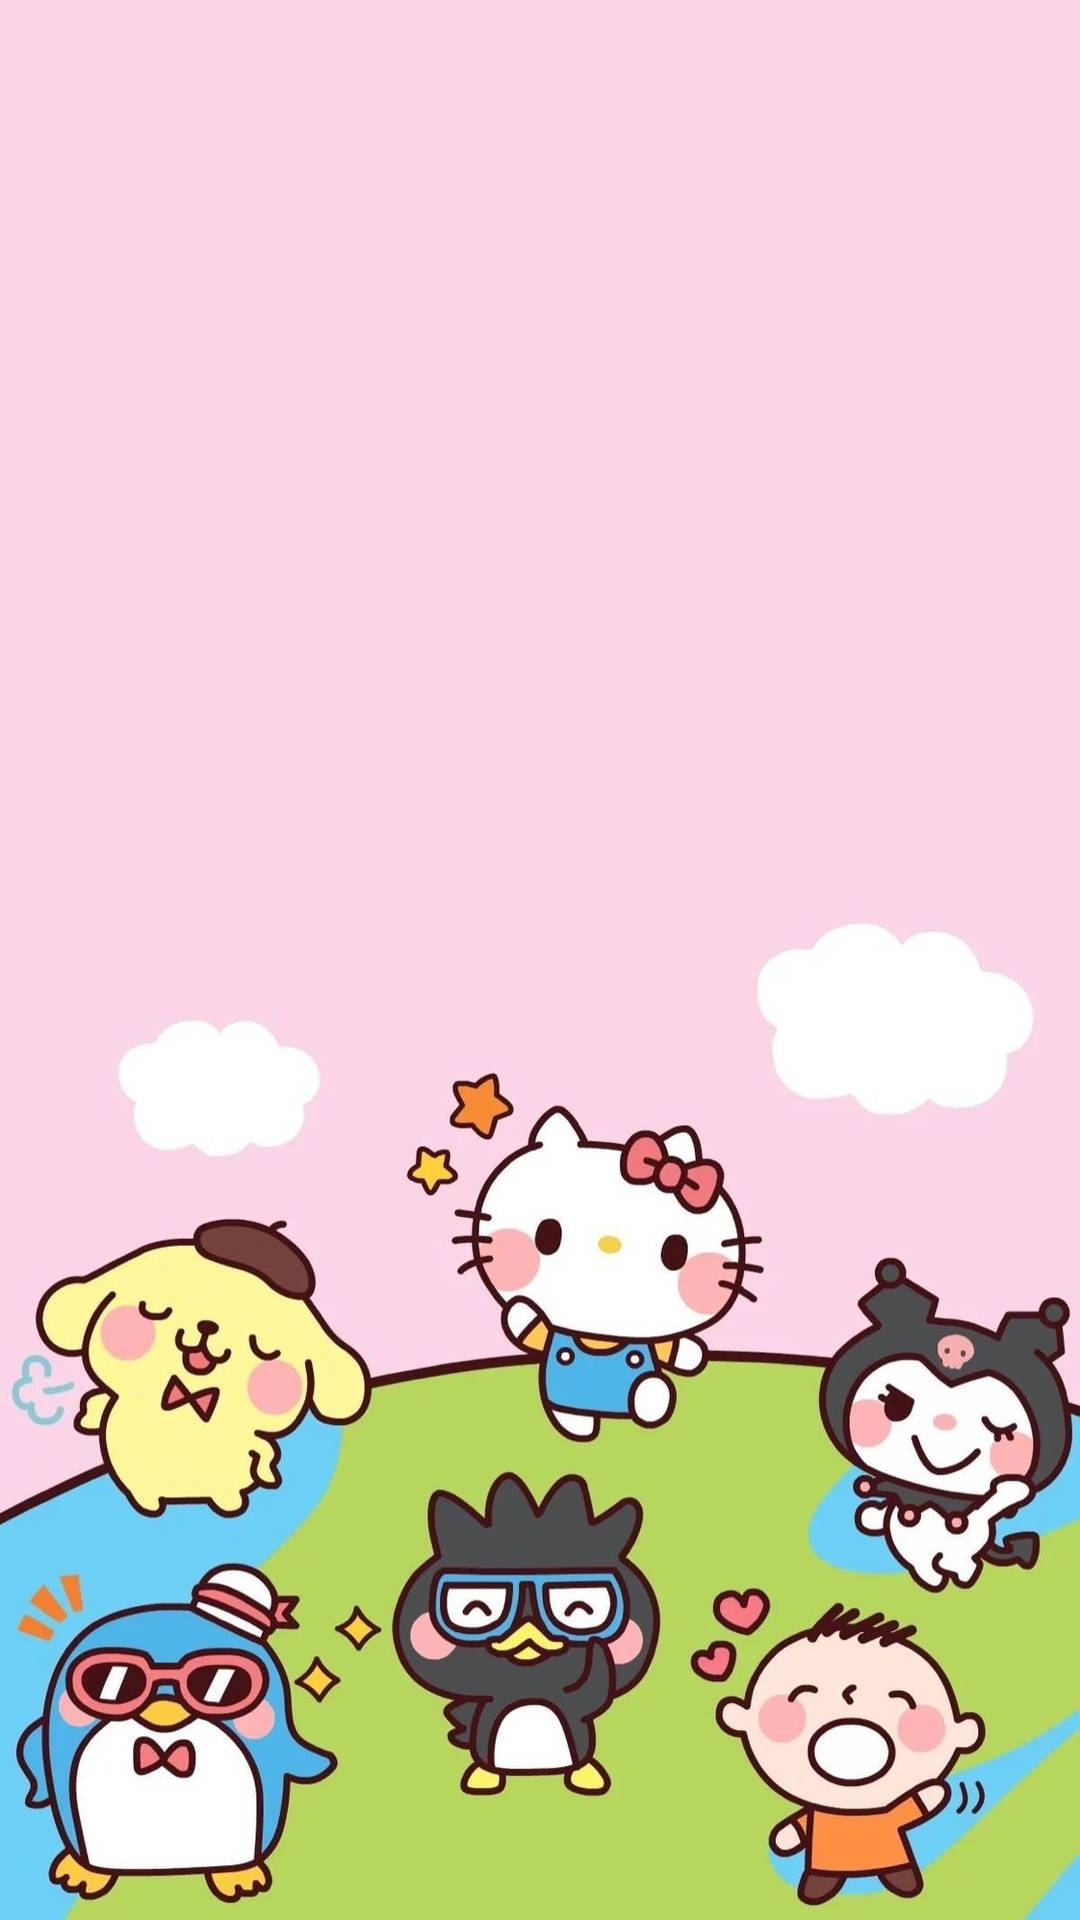 Sanrio Characters Above The Earth Background